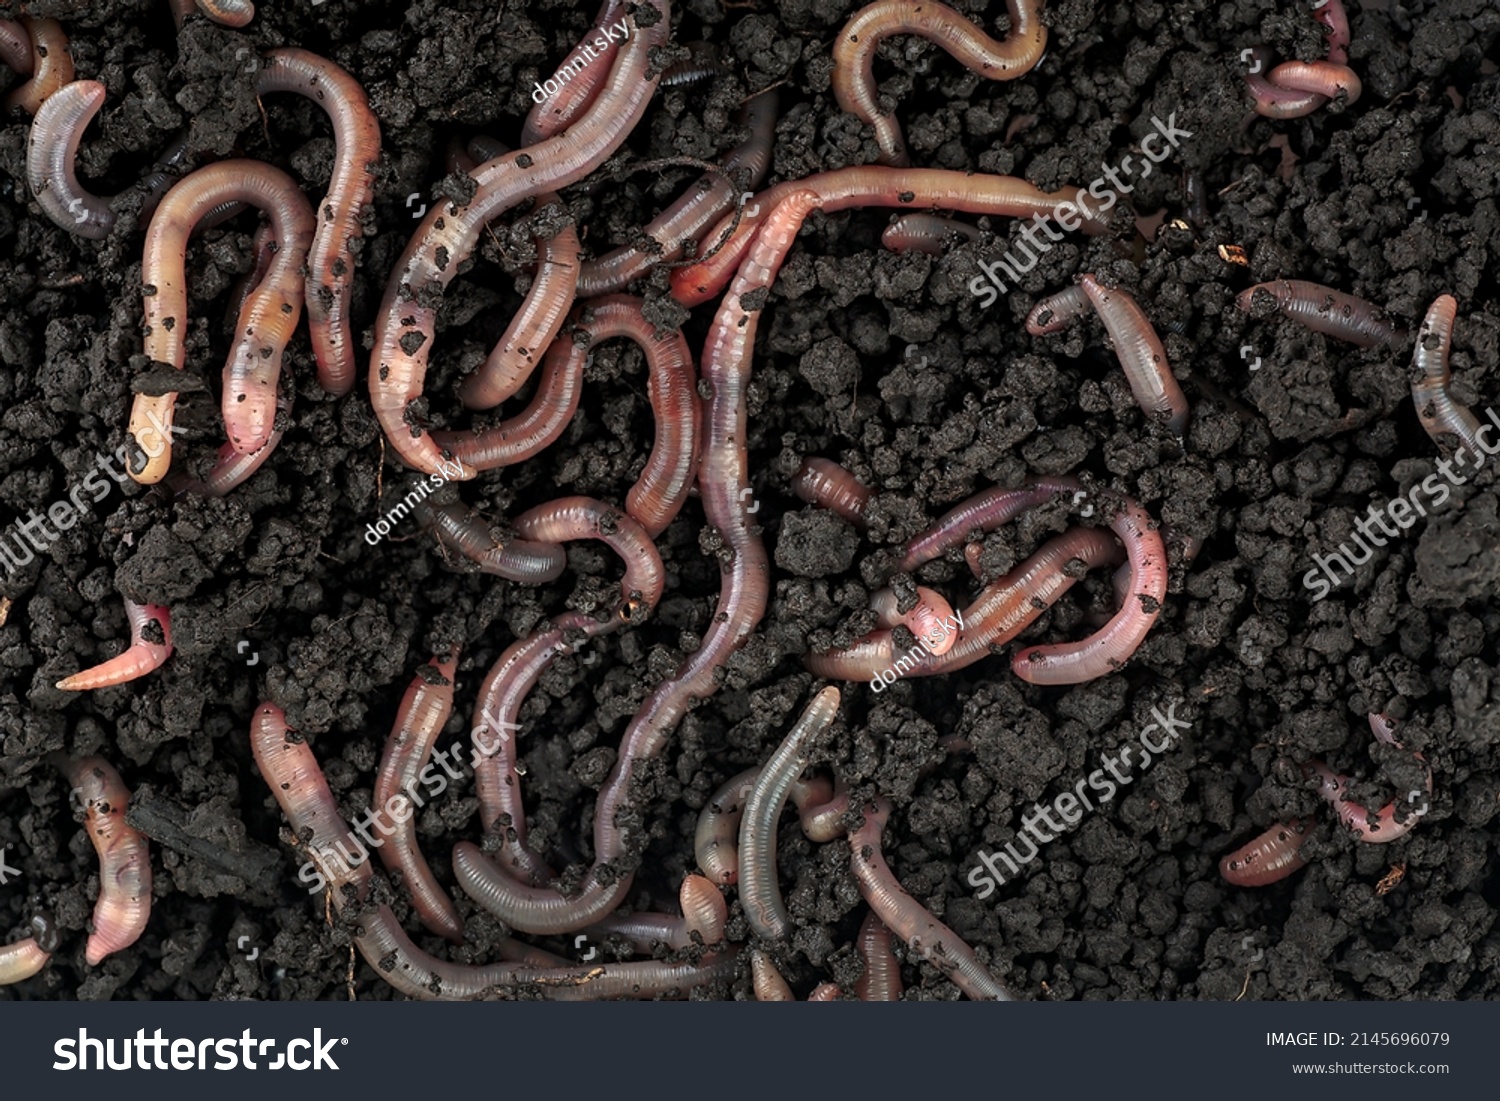 Garden compost and worms - top view of earthworms in black soil as background. #2145696079